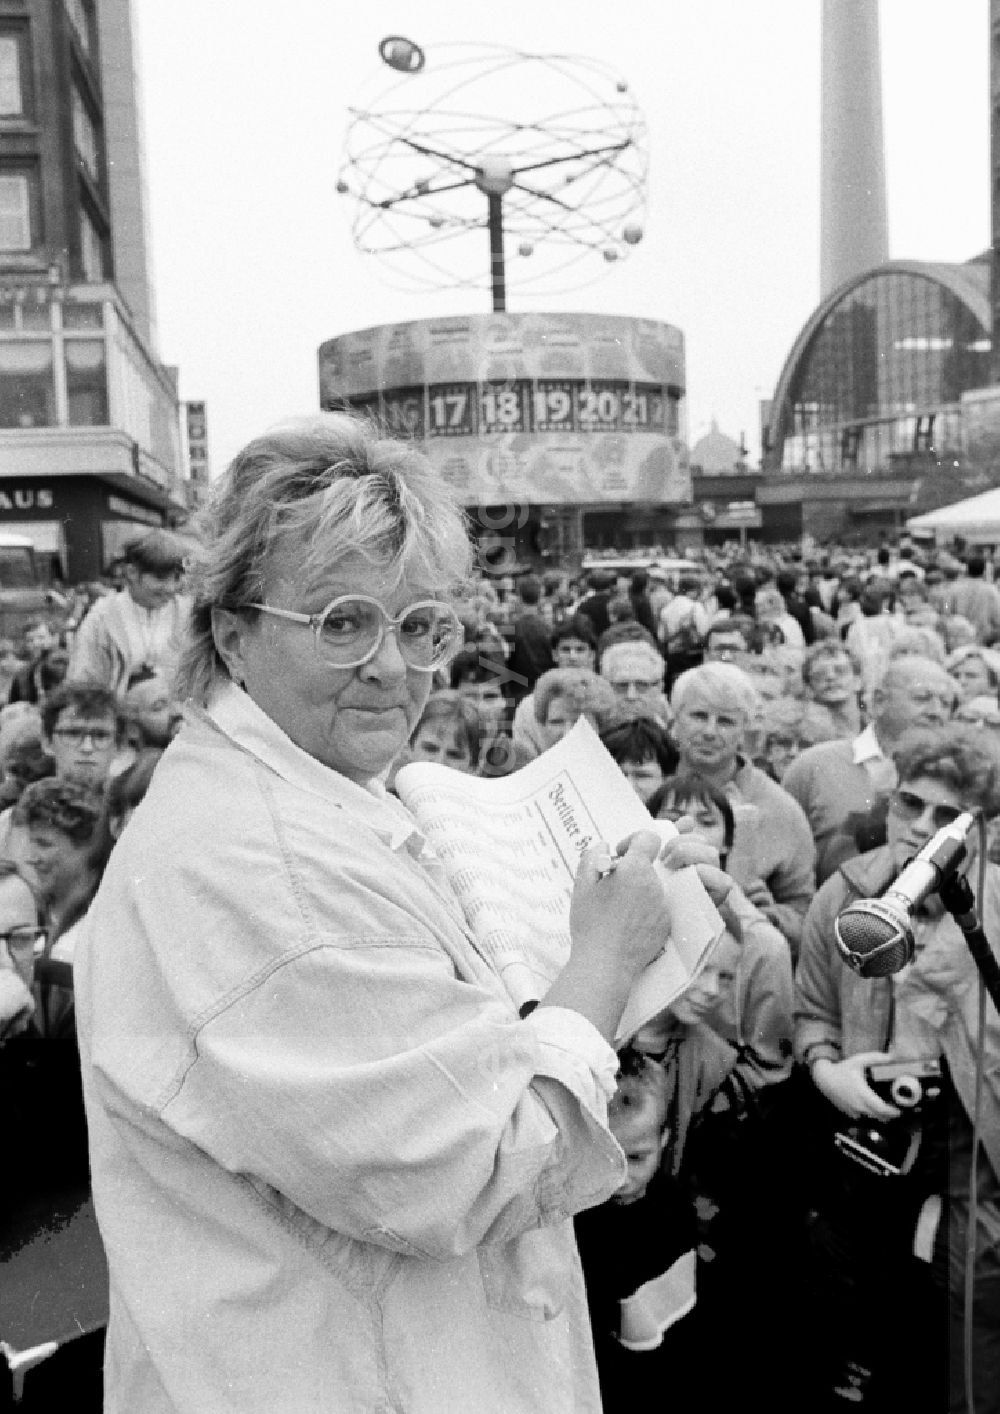 GDR image archive: Berlin - Portrait of the singer and musician Helga Hahnemann on Alexanderplatz in the district of Mitte in Berlin East Berlin in the area of the former GDR, German Democratic Republic